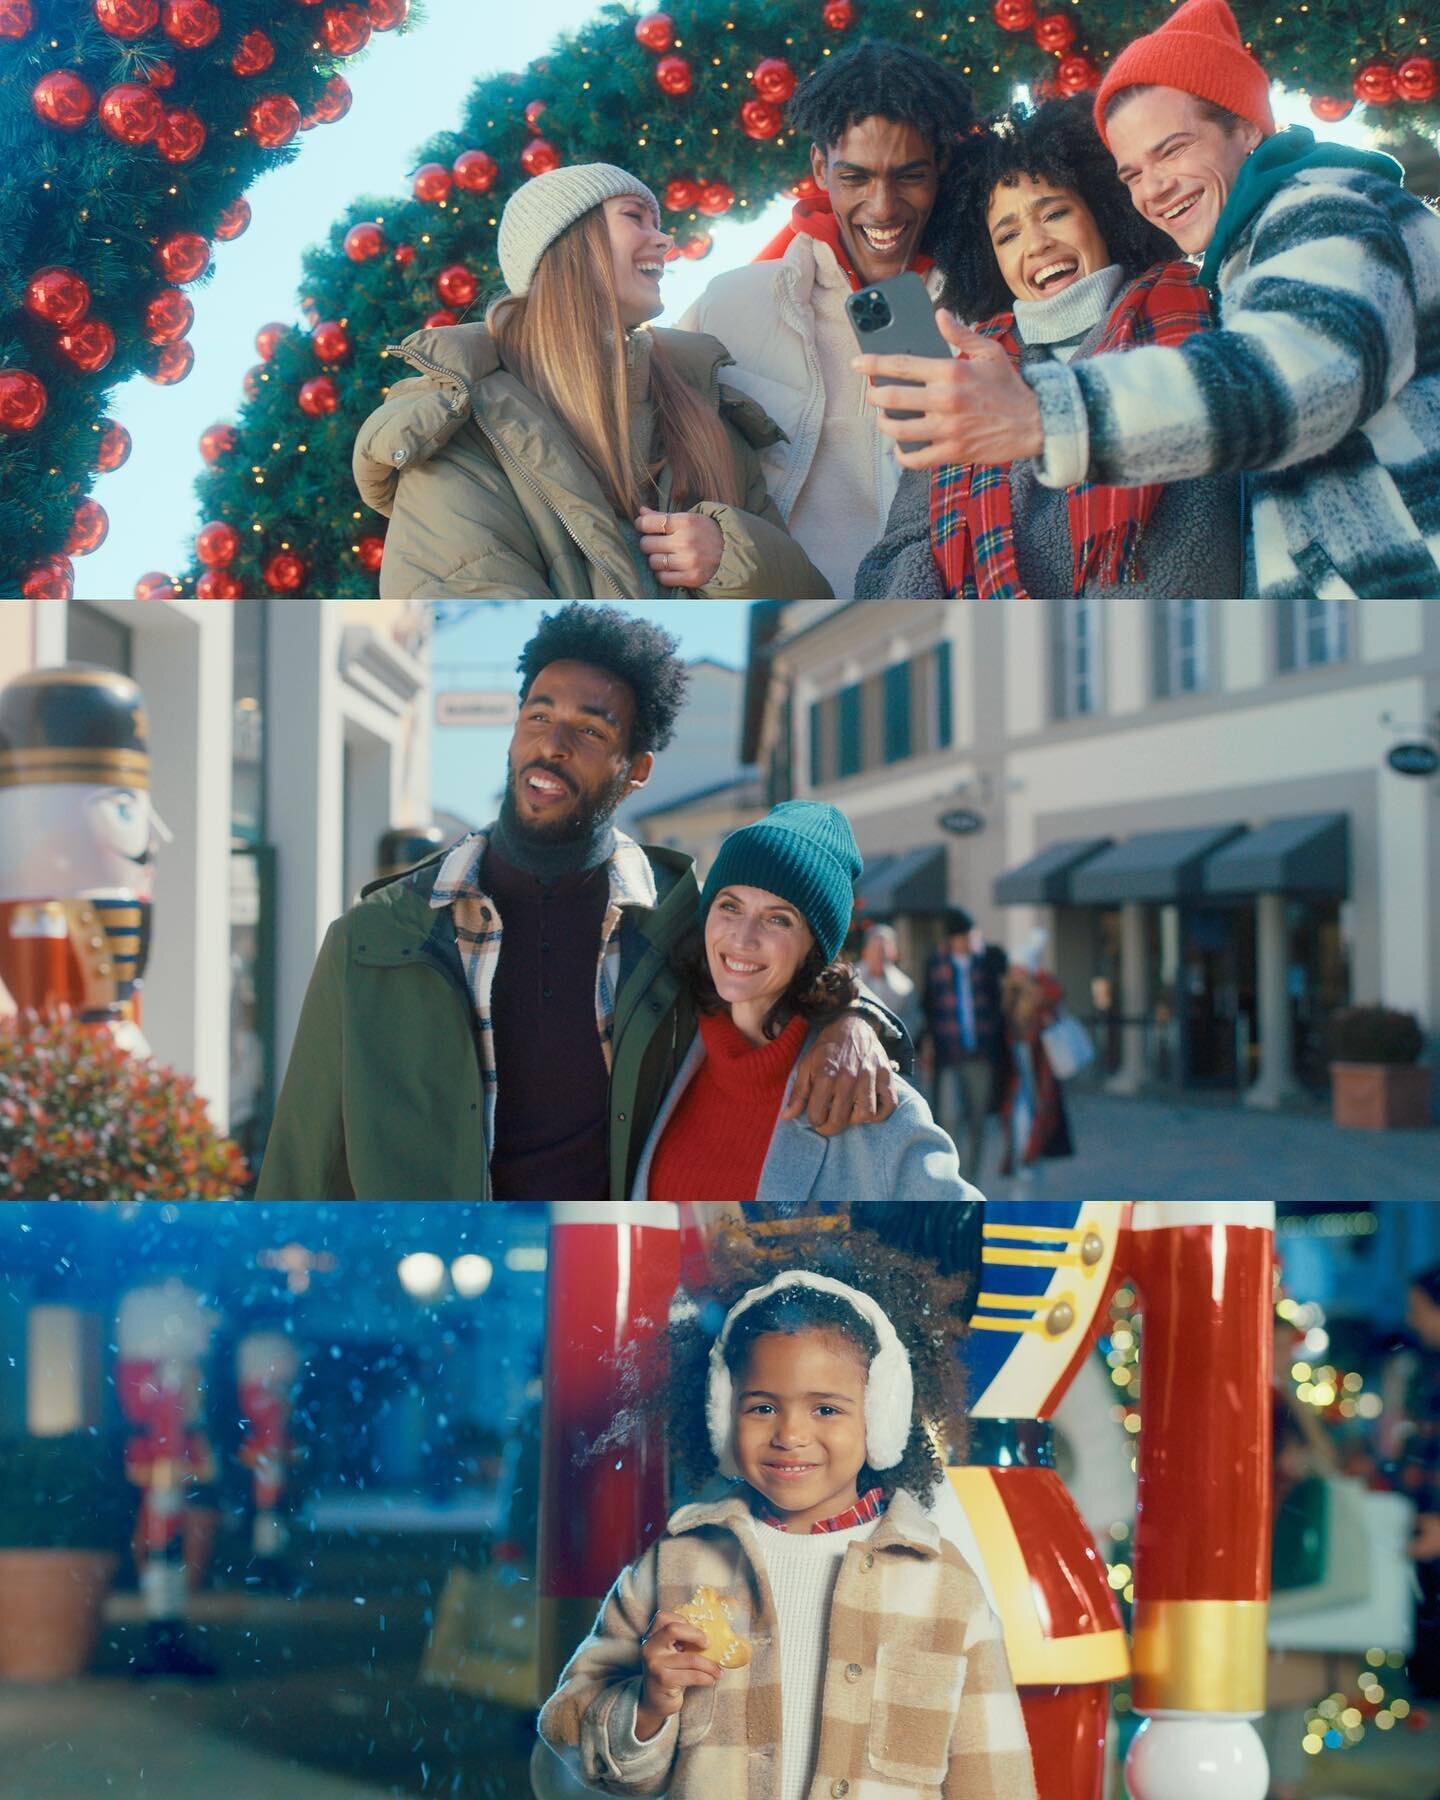 My resolution for this coming year is to post more work - starting off with this McArthurGlen TVC that ran this December. 

🎥 Alexa Mini
🔮@angenieuxlenses Optimo Primes 
⚔️@freeflysystems Mōvi Pro w/ @readyrig , Moovie slider top down rig. 

McArth